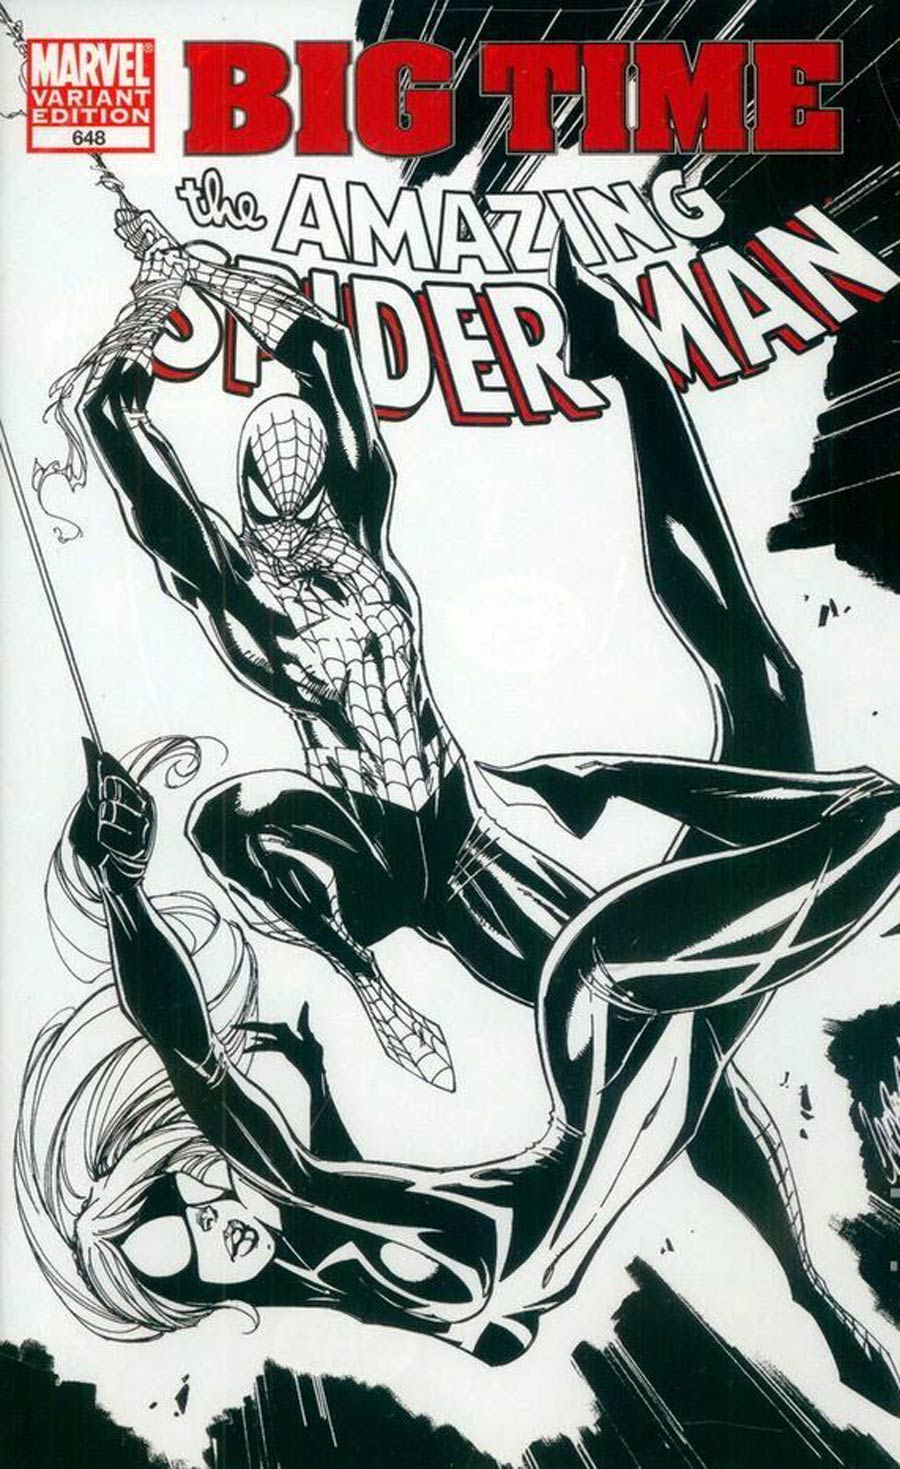 Amazing Spider-Man Vol 2 #648 Cover F Incentive J Scott Campbell Spider-Girl Variant Sketch Cover (Spider-Man Big Time Tie-In)